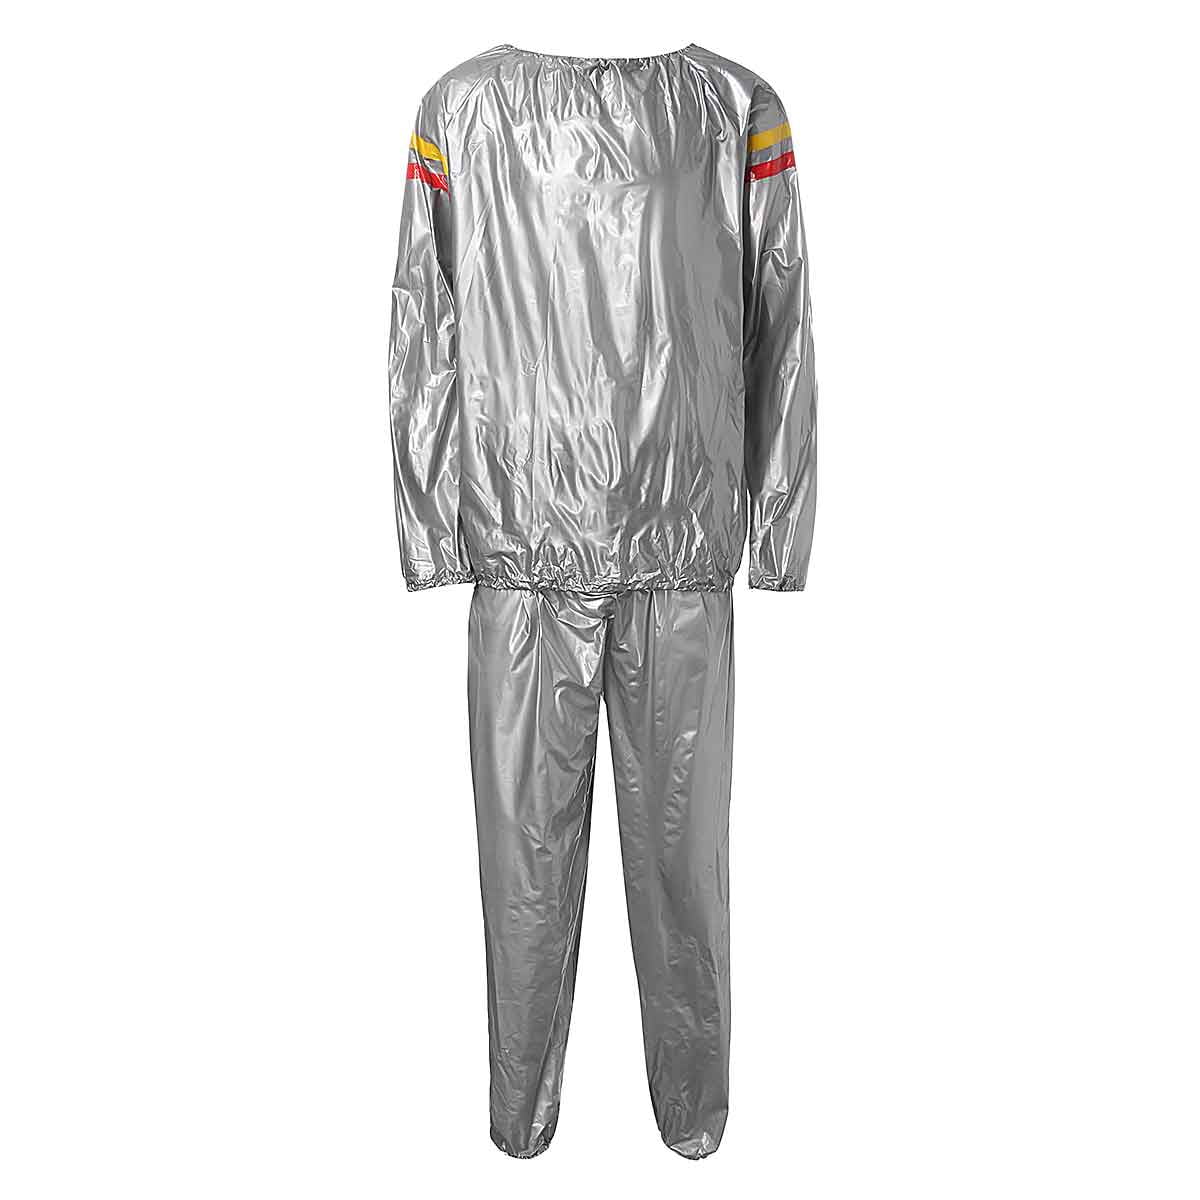 Athletic Works Sauna Suit Reflective Detailing on Sleeves PVC Weight Loss Unisex 